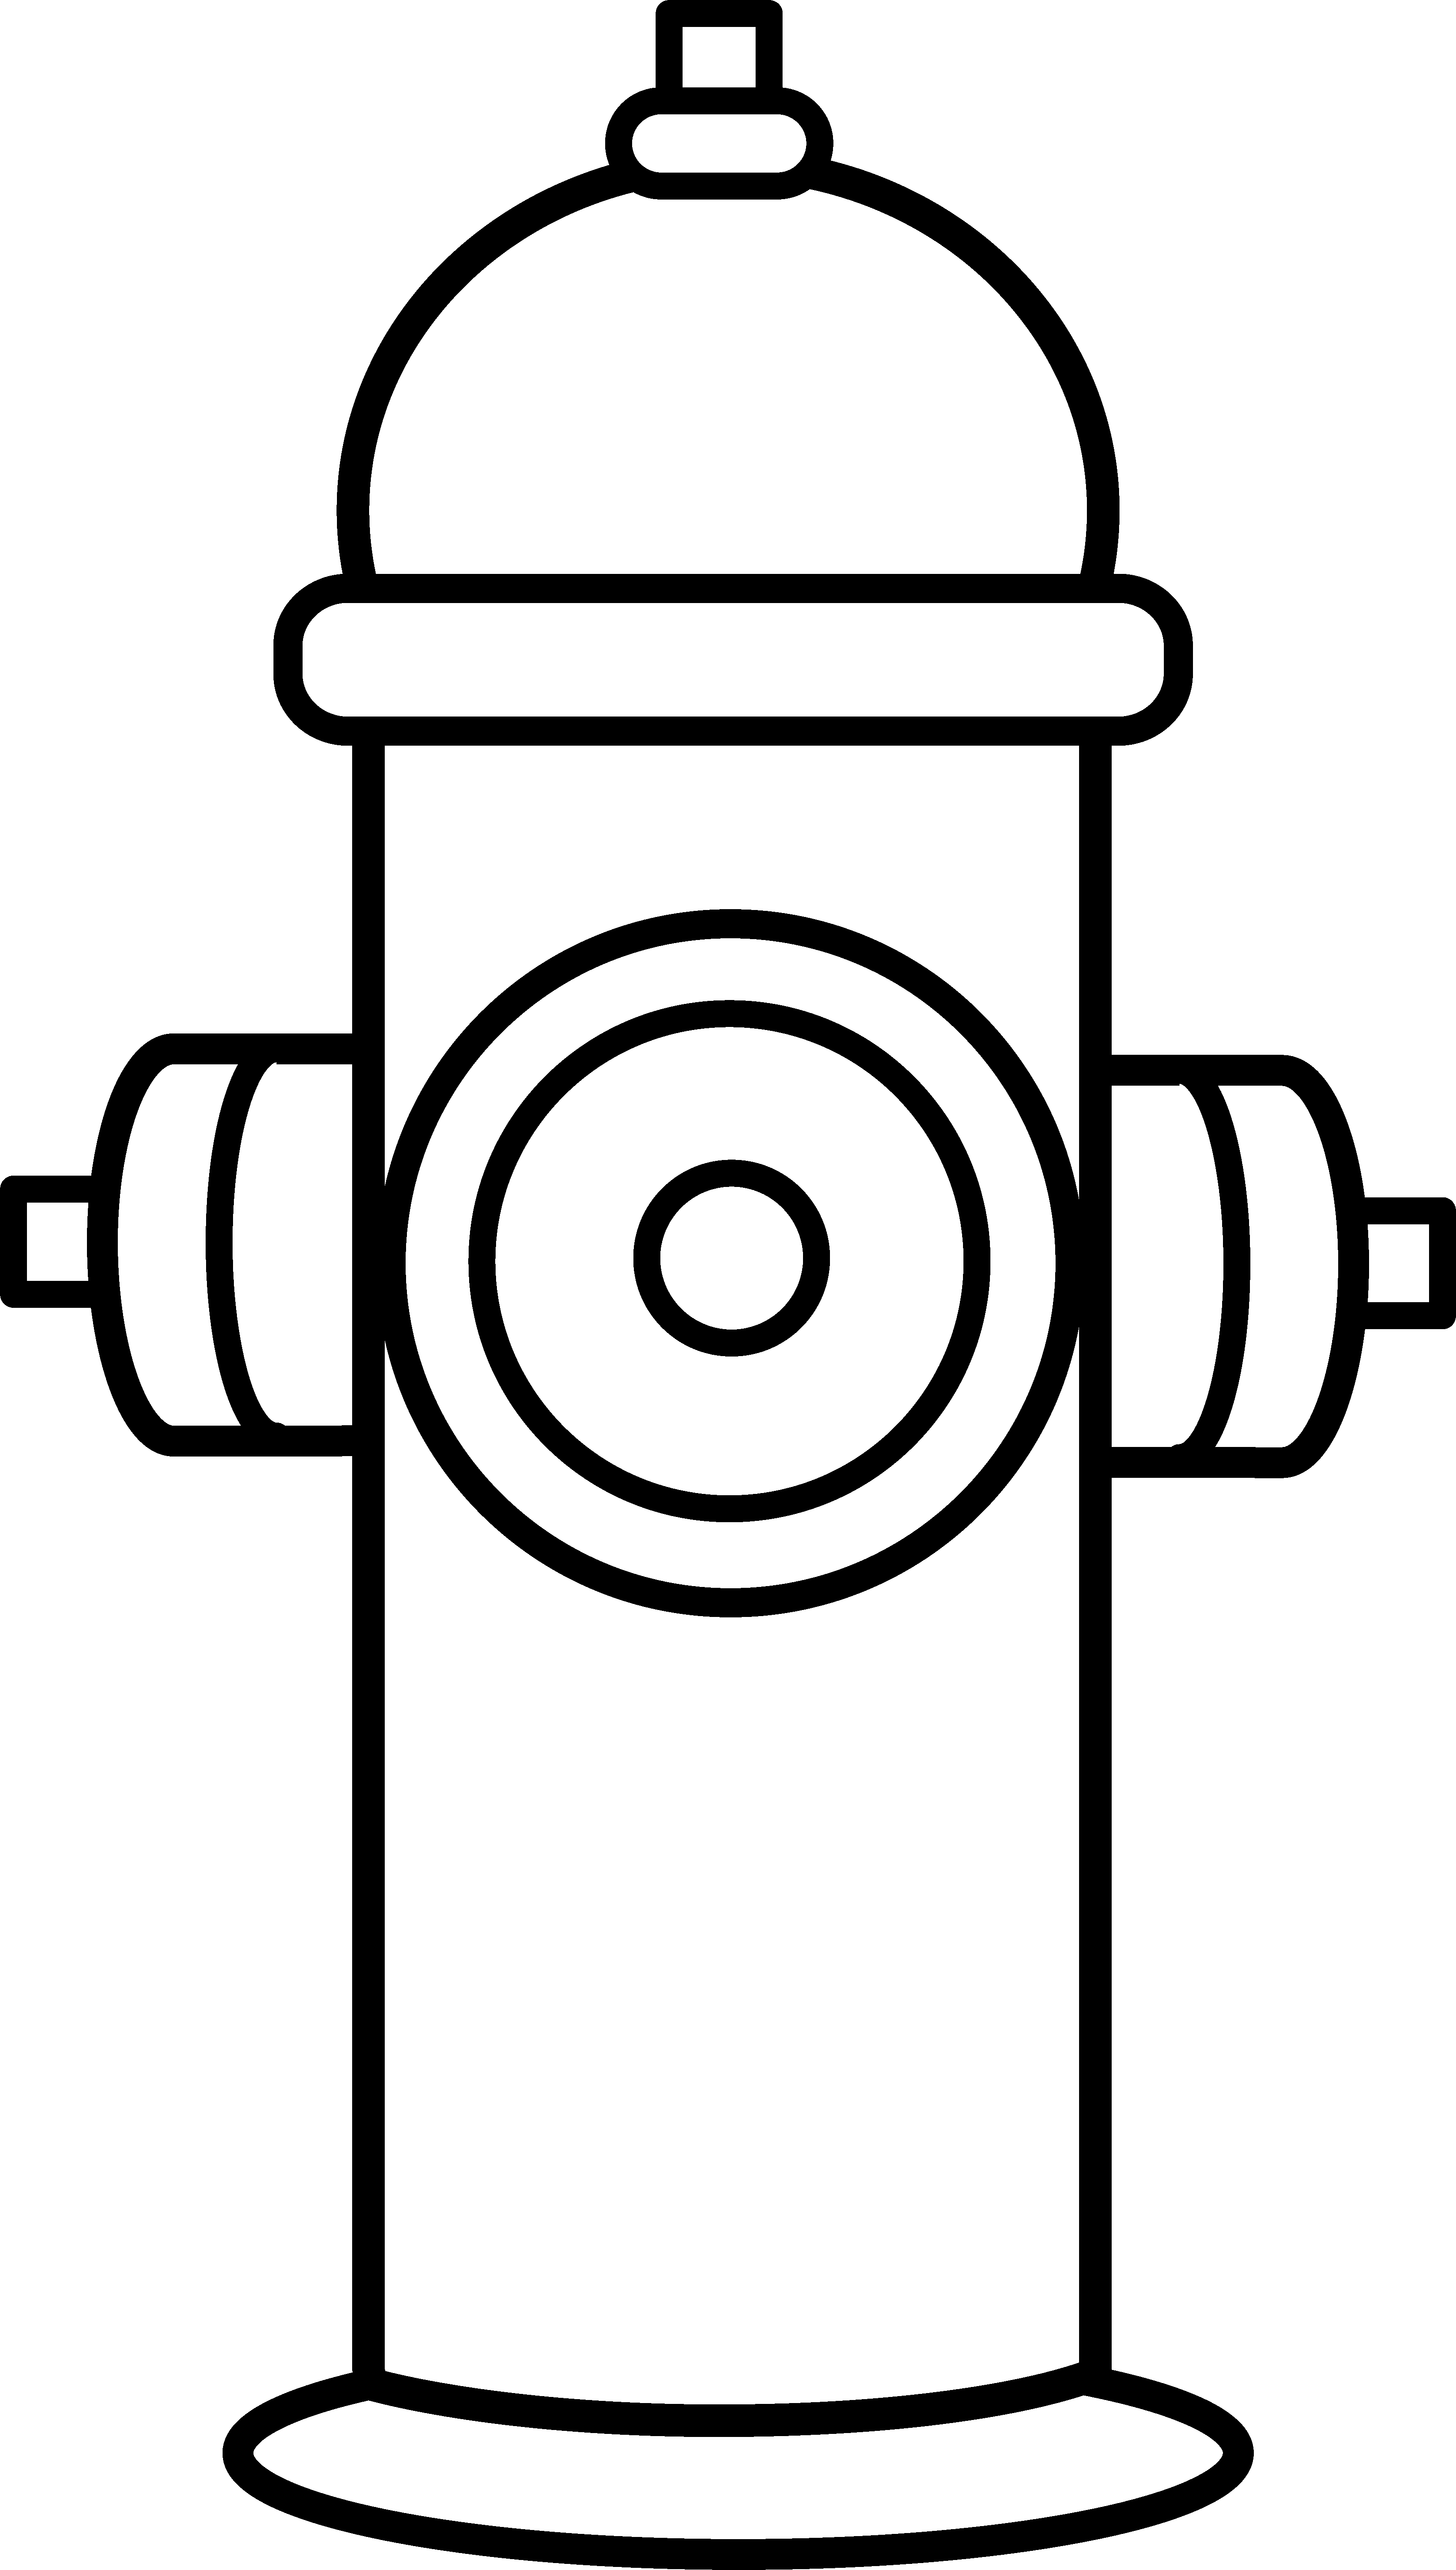 fire hydrant clipart. Download Fire Hydrant Black .